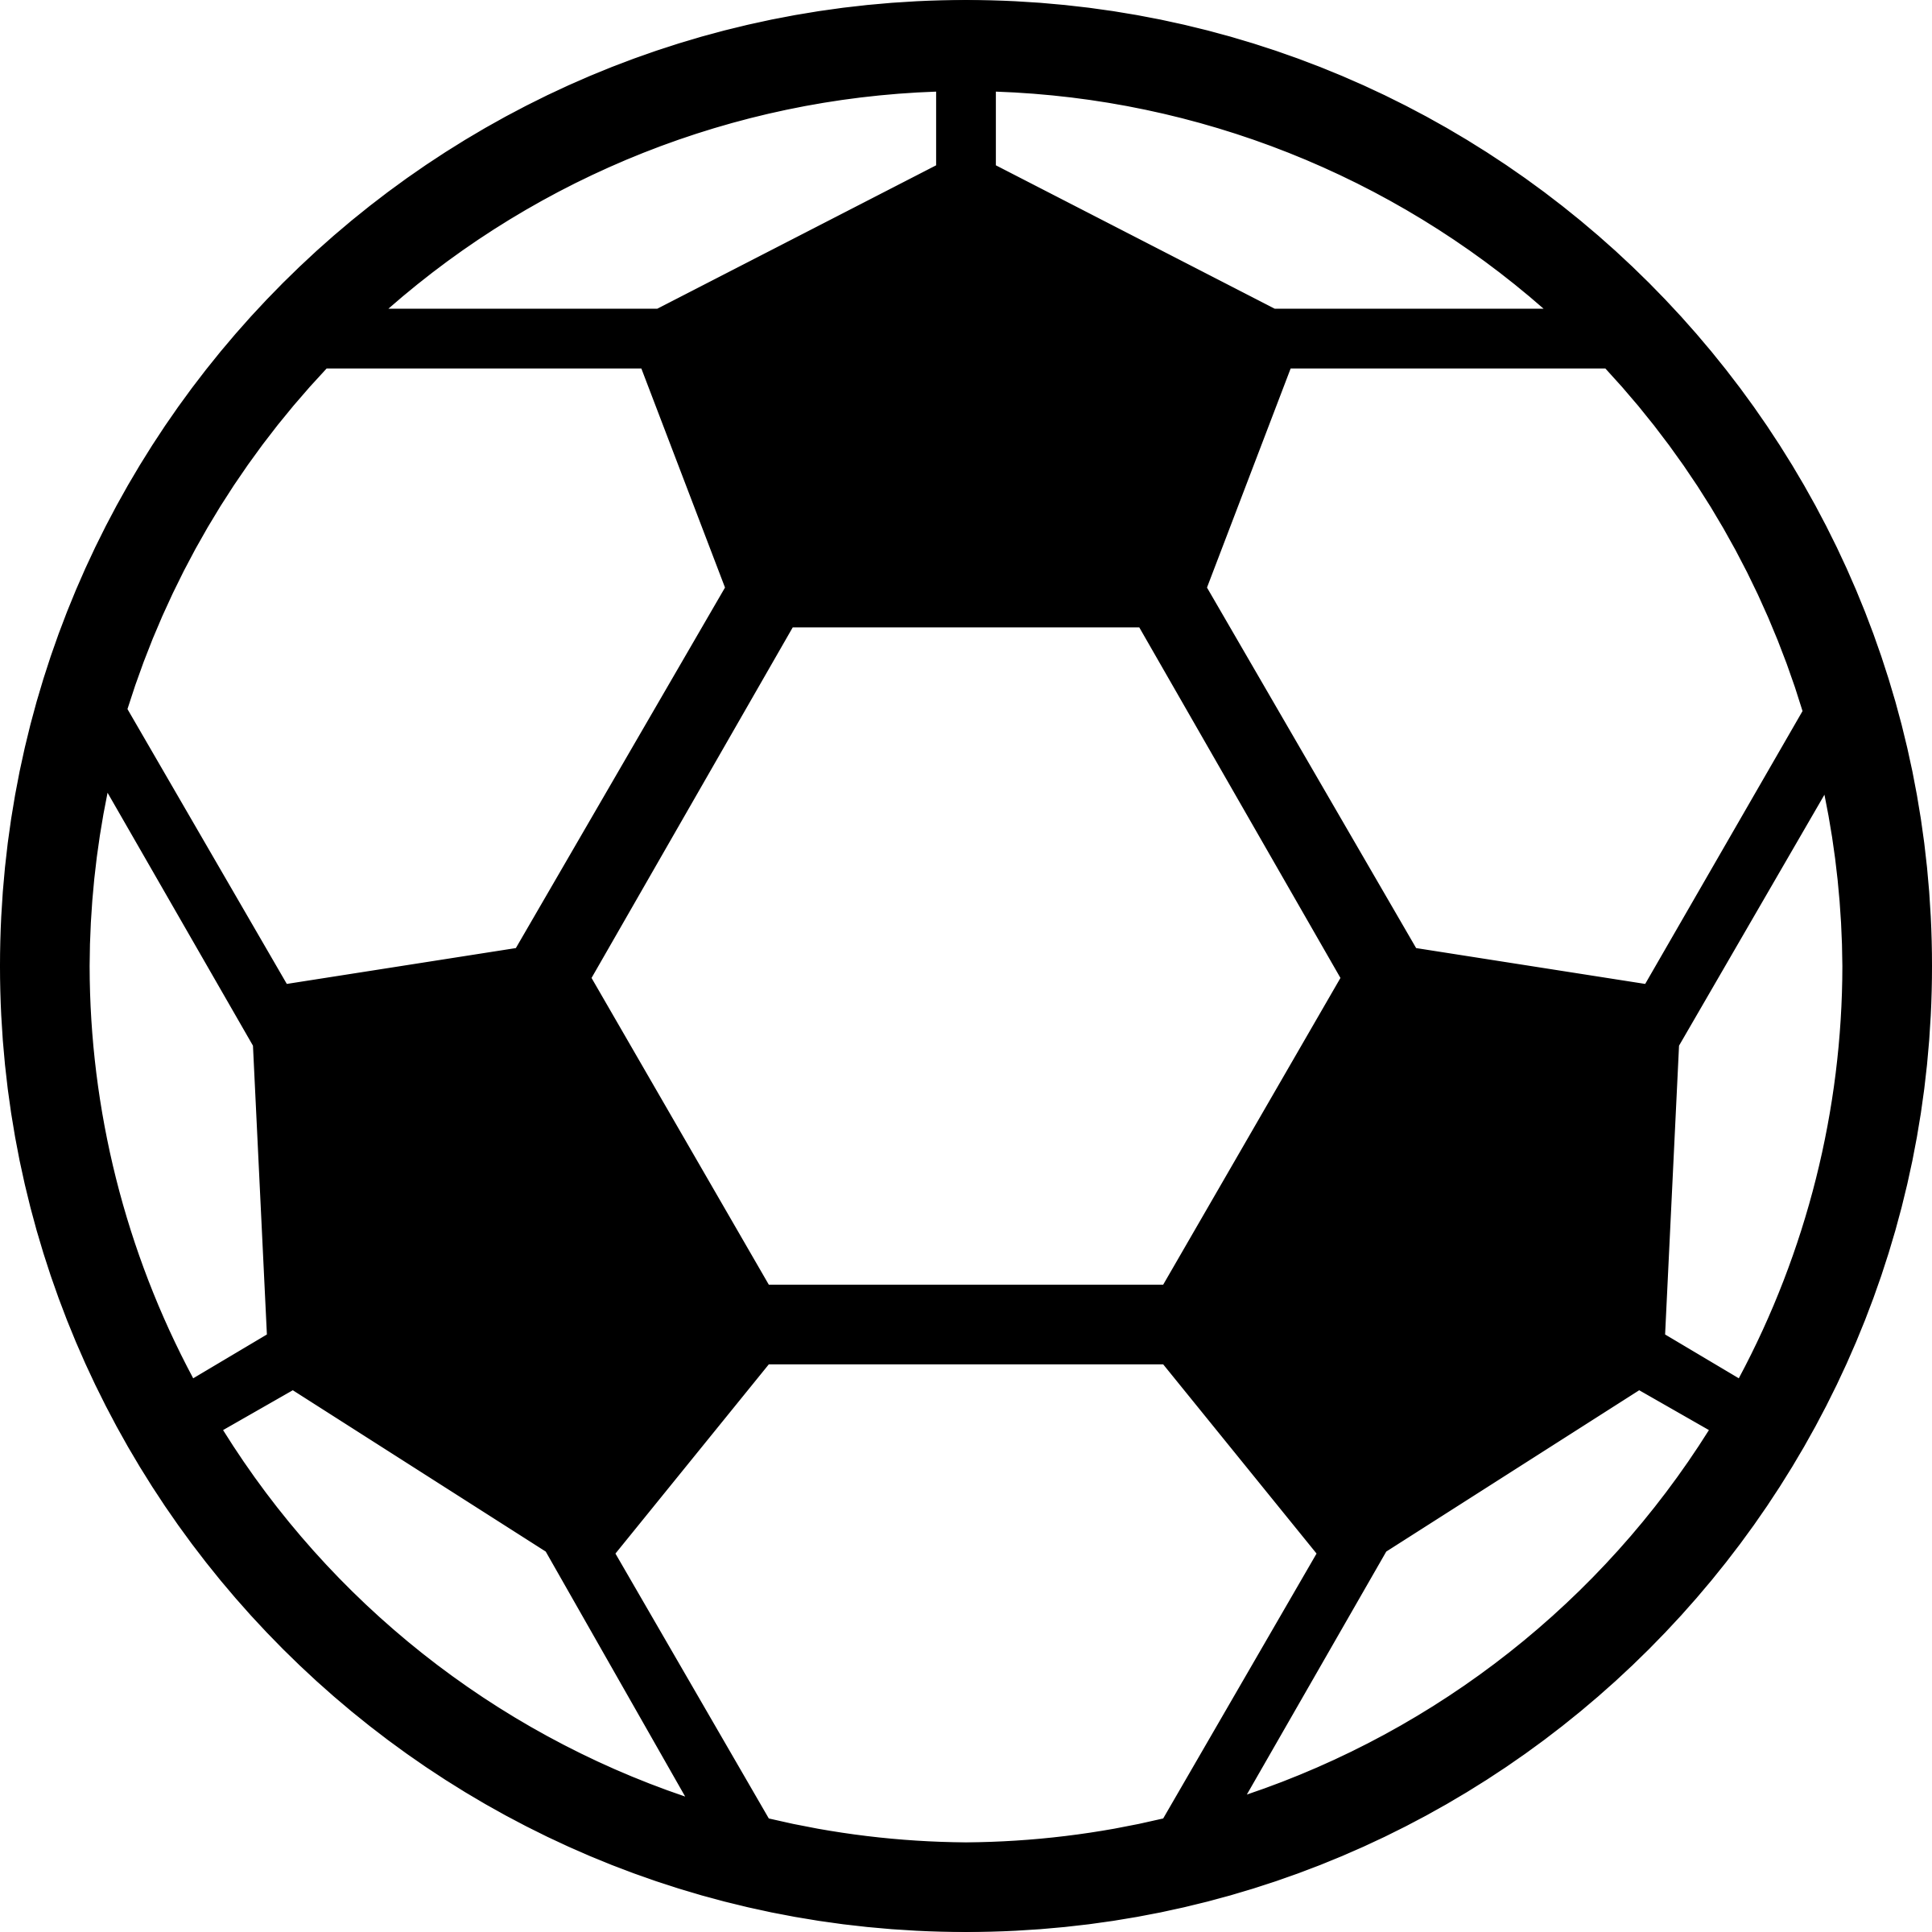 Image Of A Soccer Ball 